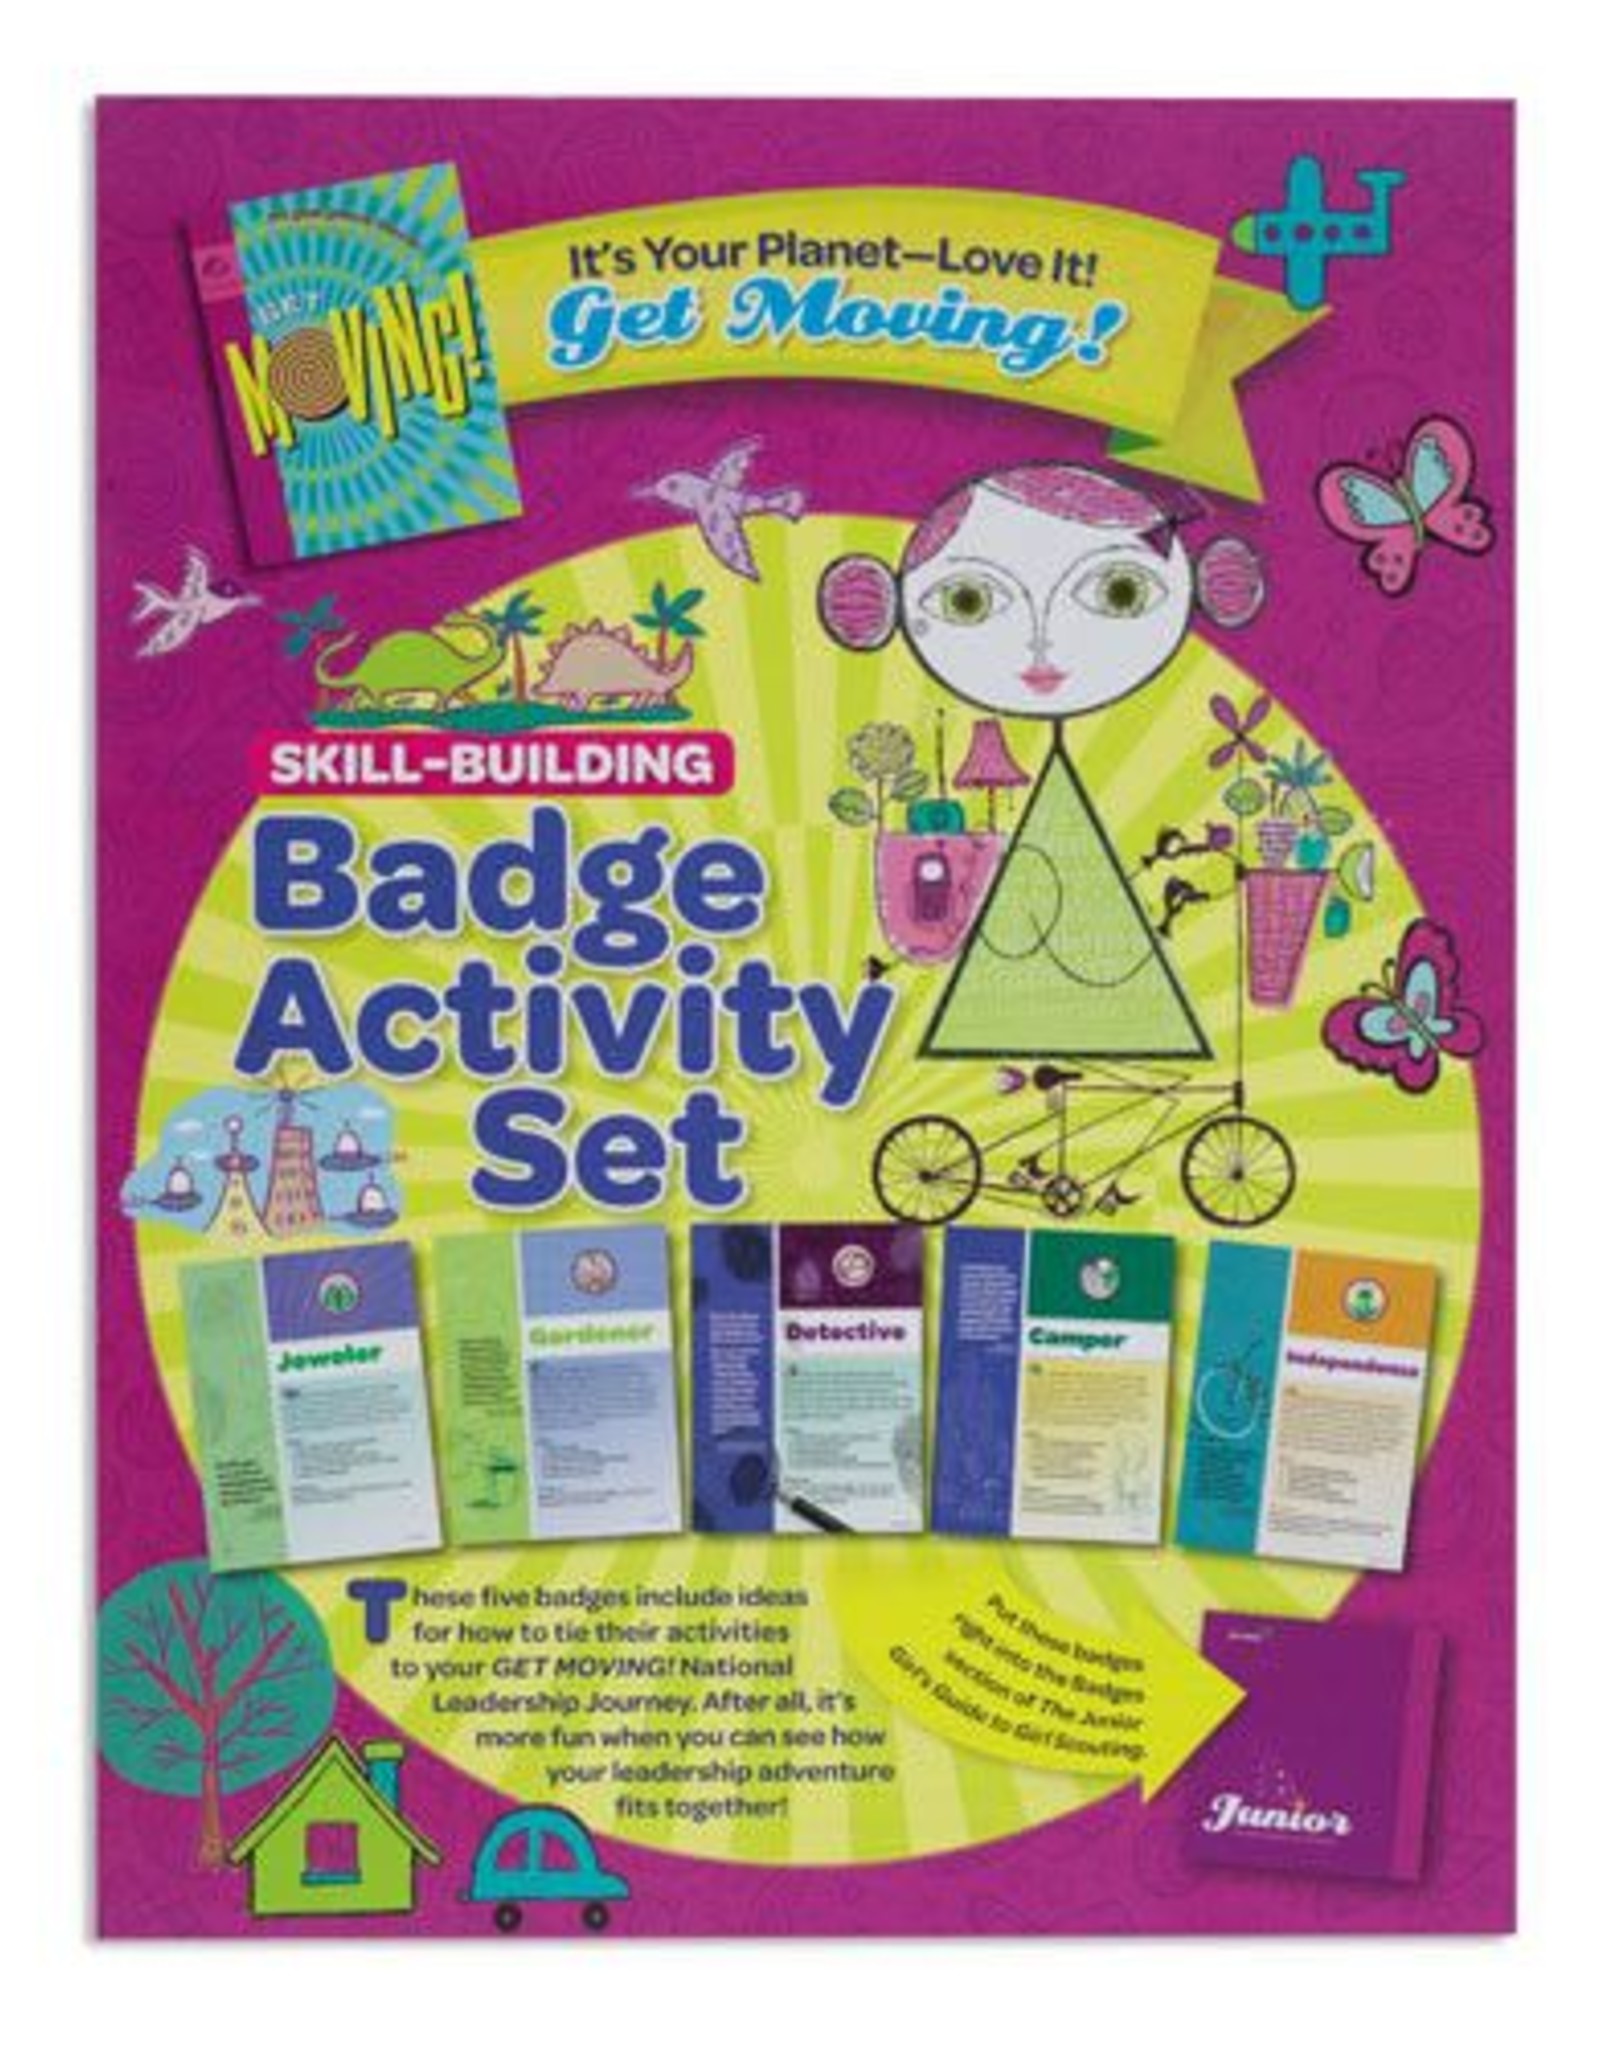 GIRL SCOUTS OF THE USA Junior It's Your Planet Badge Activity Set